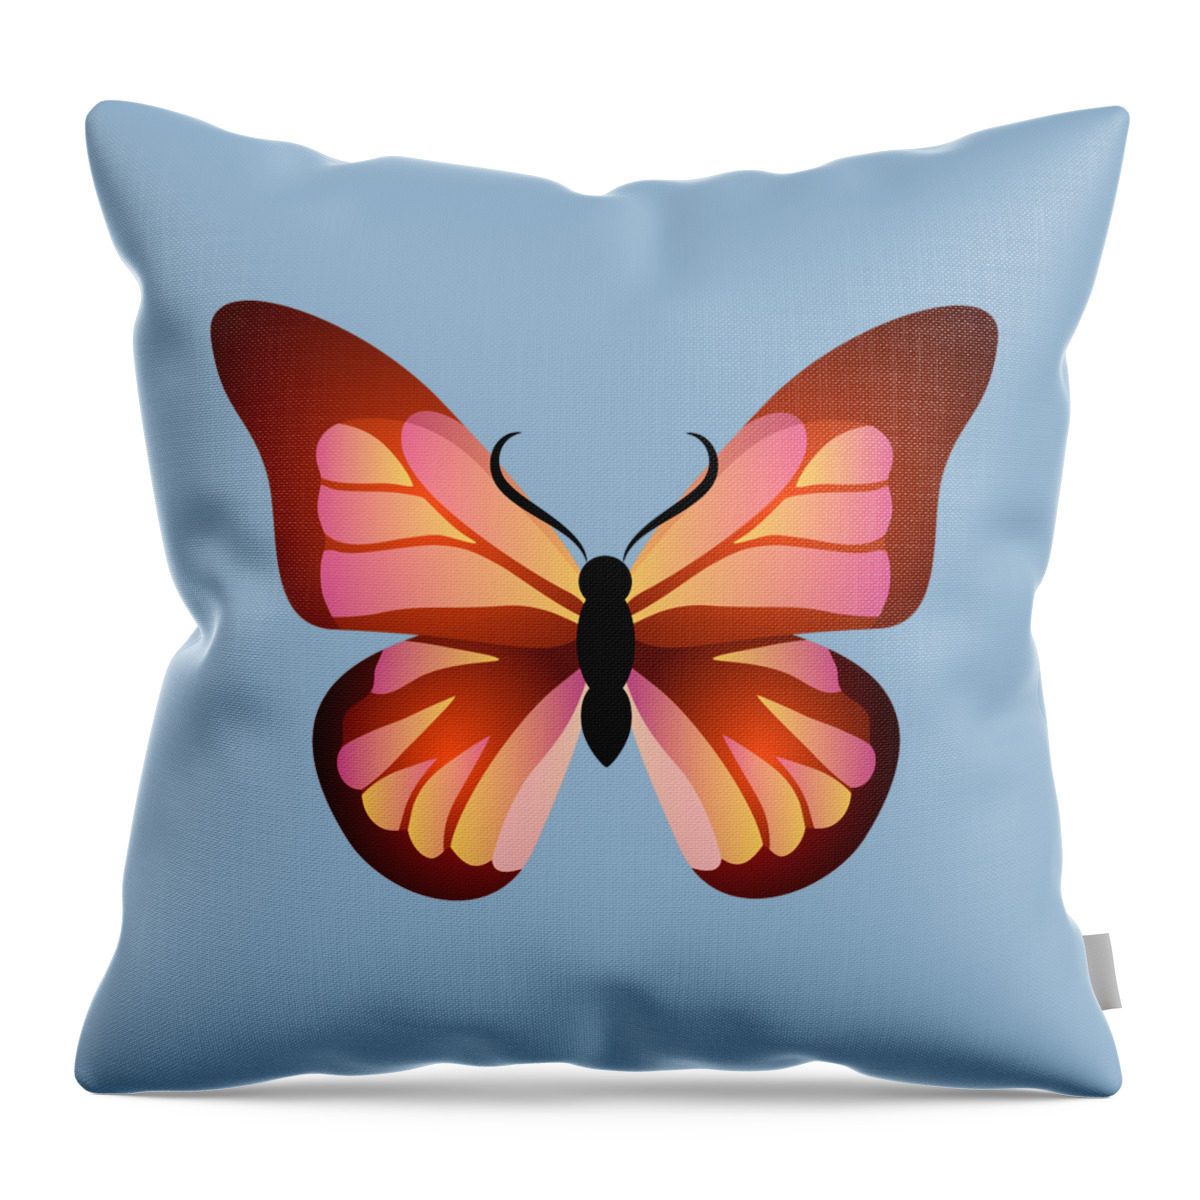 Butterfly Throw Pillow featuring the digital art Butterfly Graphic Pink and Orange by MM Anderson